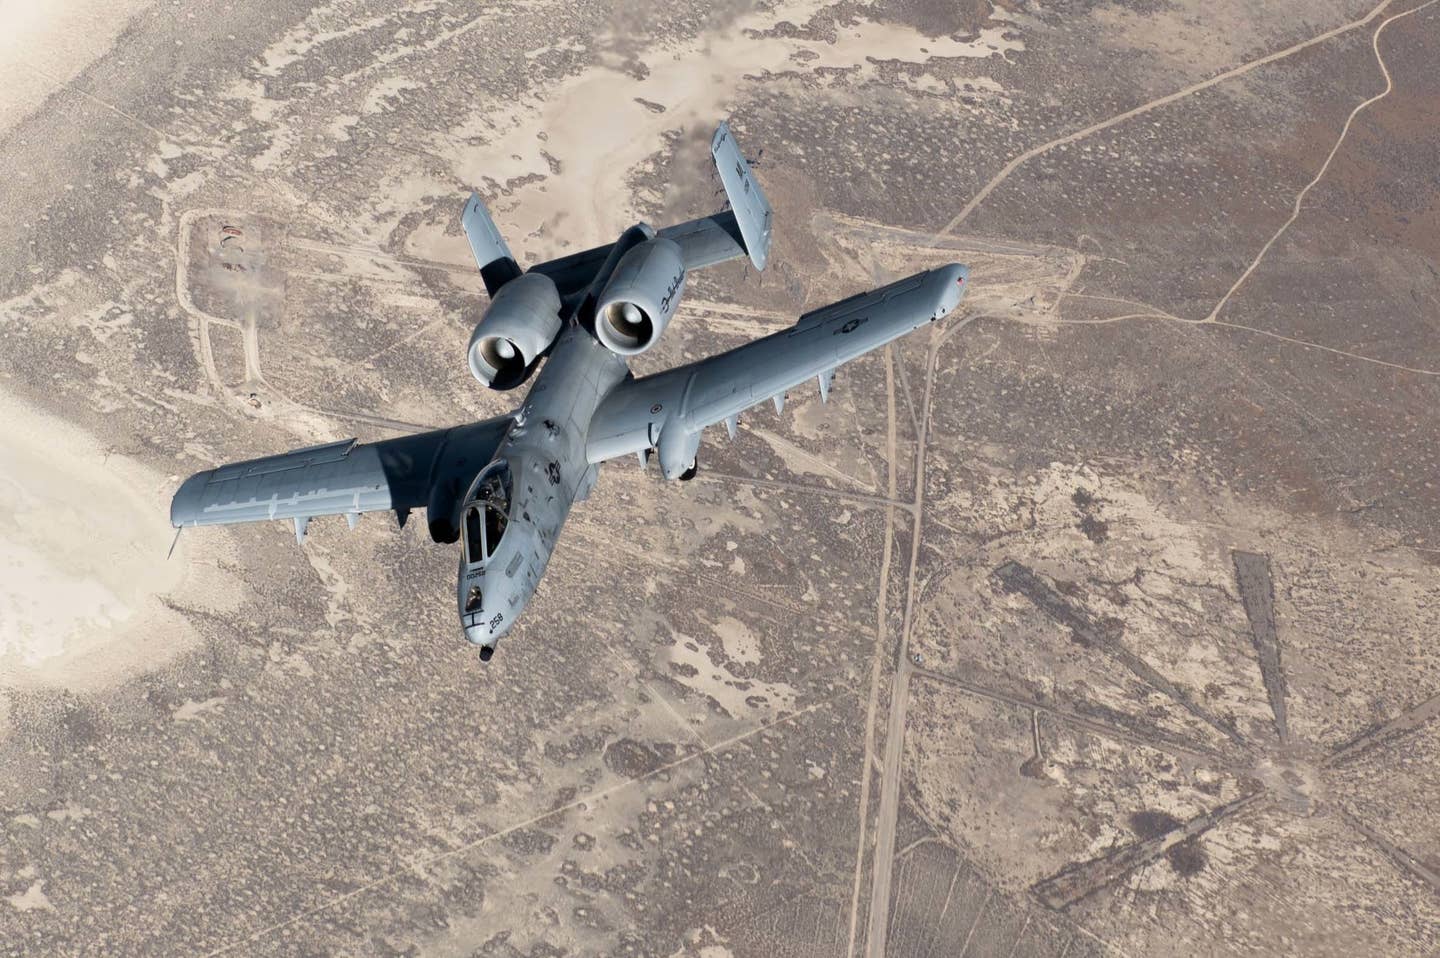 An A-10 Warthog assigned to the 514th Flight Test Squadron peels away after receiving fuel over Idaho on Nov. 25, 2020. <em>Credit: Senior Airman Danielle Charmichael/U.S. Air Force</em>